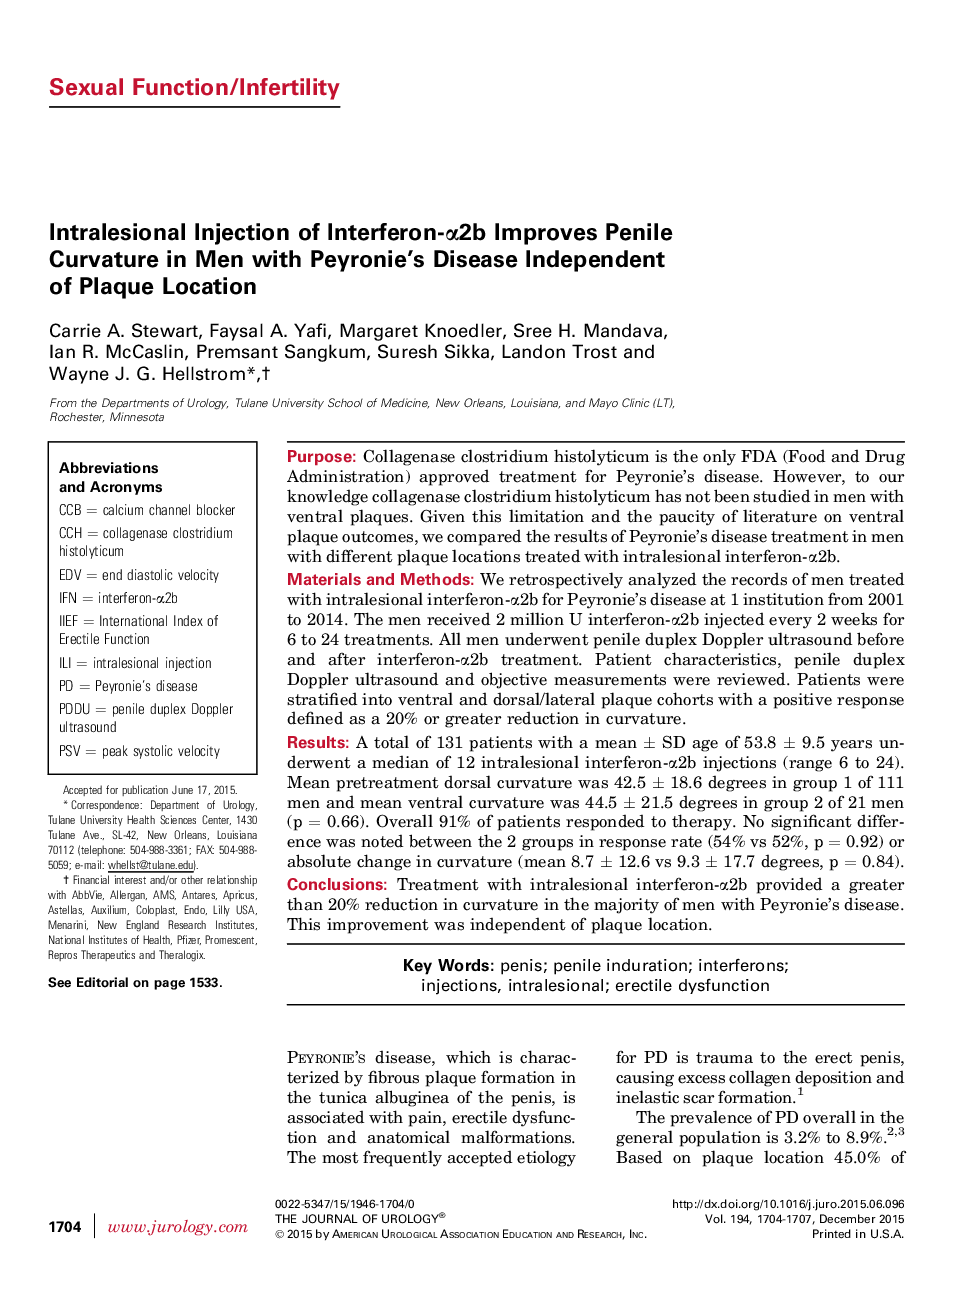 Intralesional Injection of Interferon-α2b Improves Penile Curvature in Men with Peyronie's Disease Independent of Plaque Location 